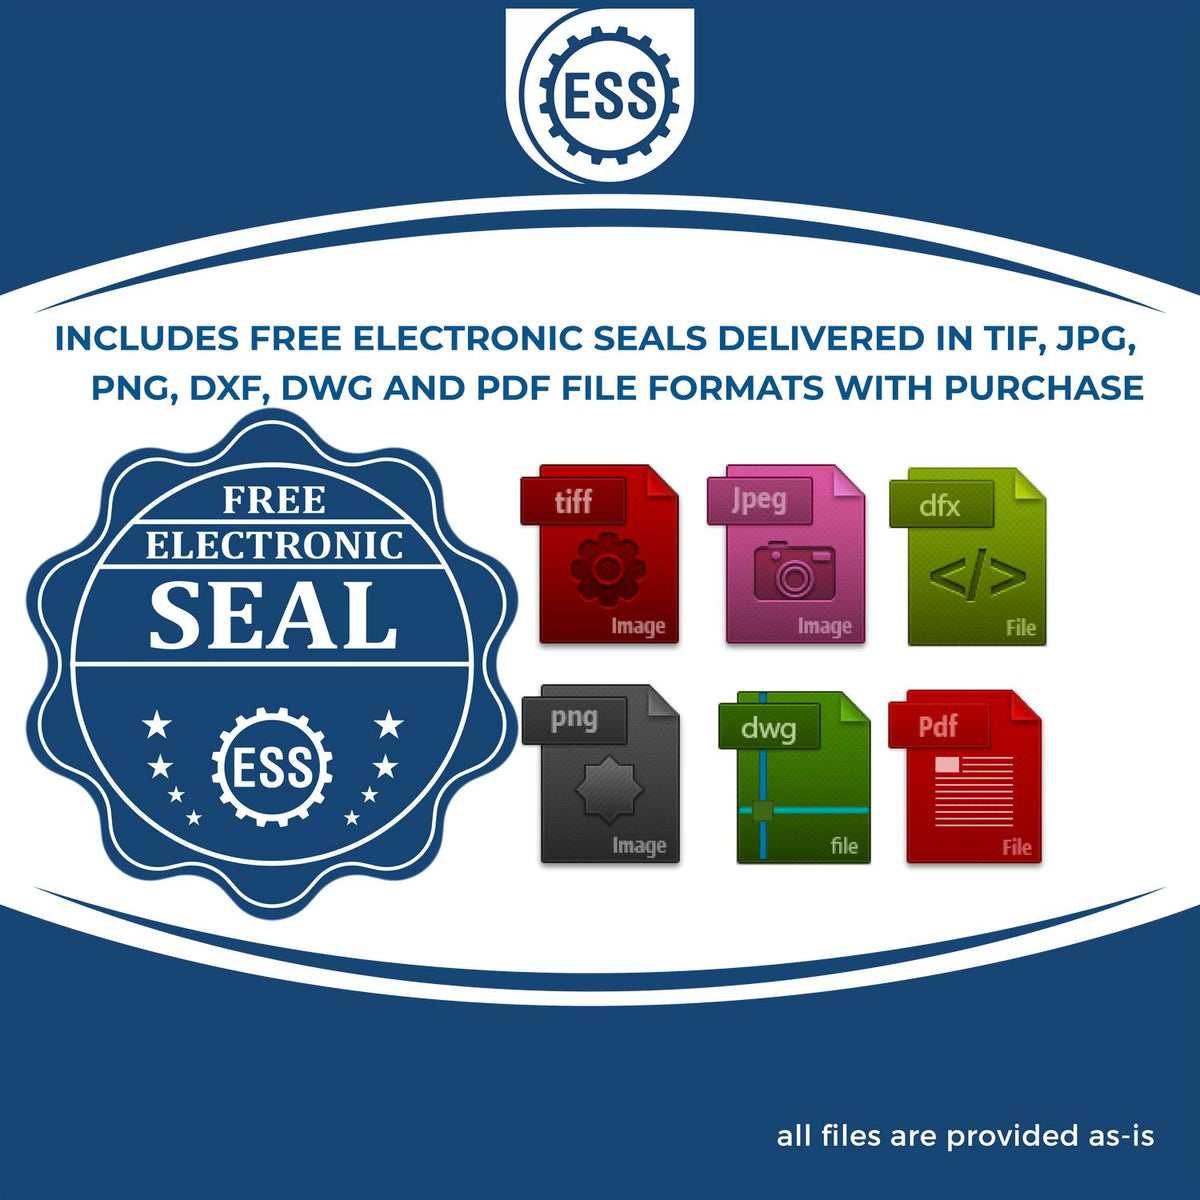 An infographic for the free electronic seal for the Gift Kentucky Engineer Seal illustrating the different file type icons such as DXF, DWG, TIF, JPG and PNG.